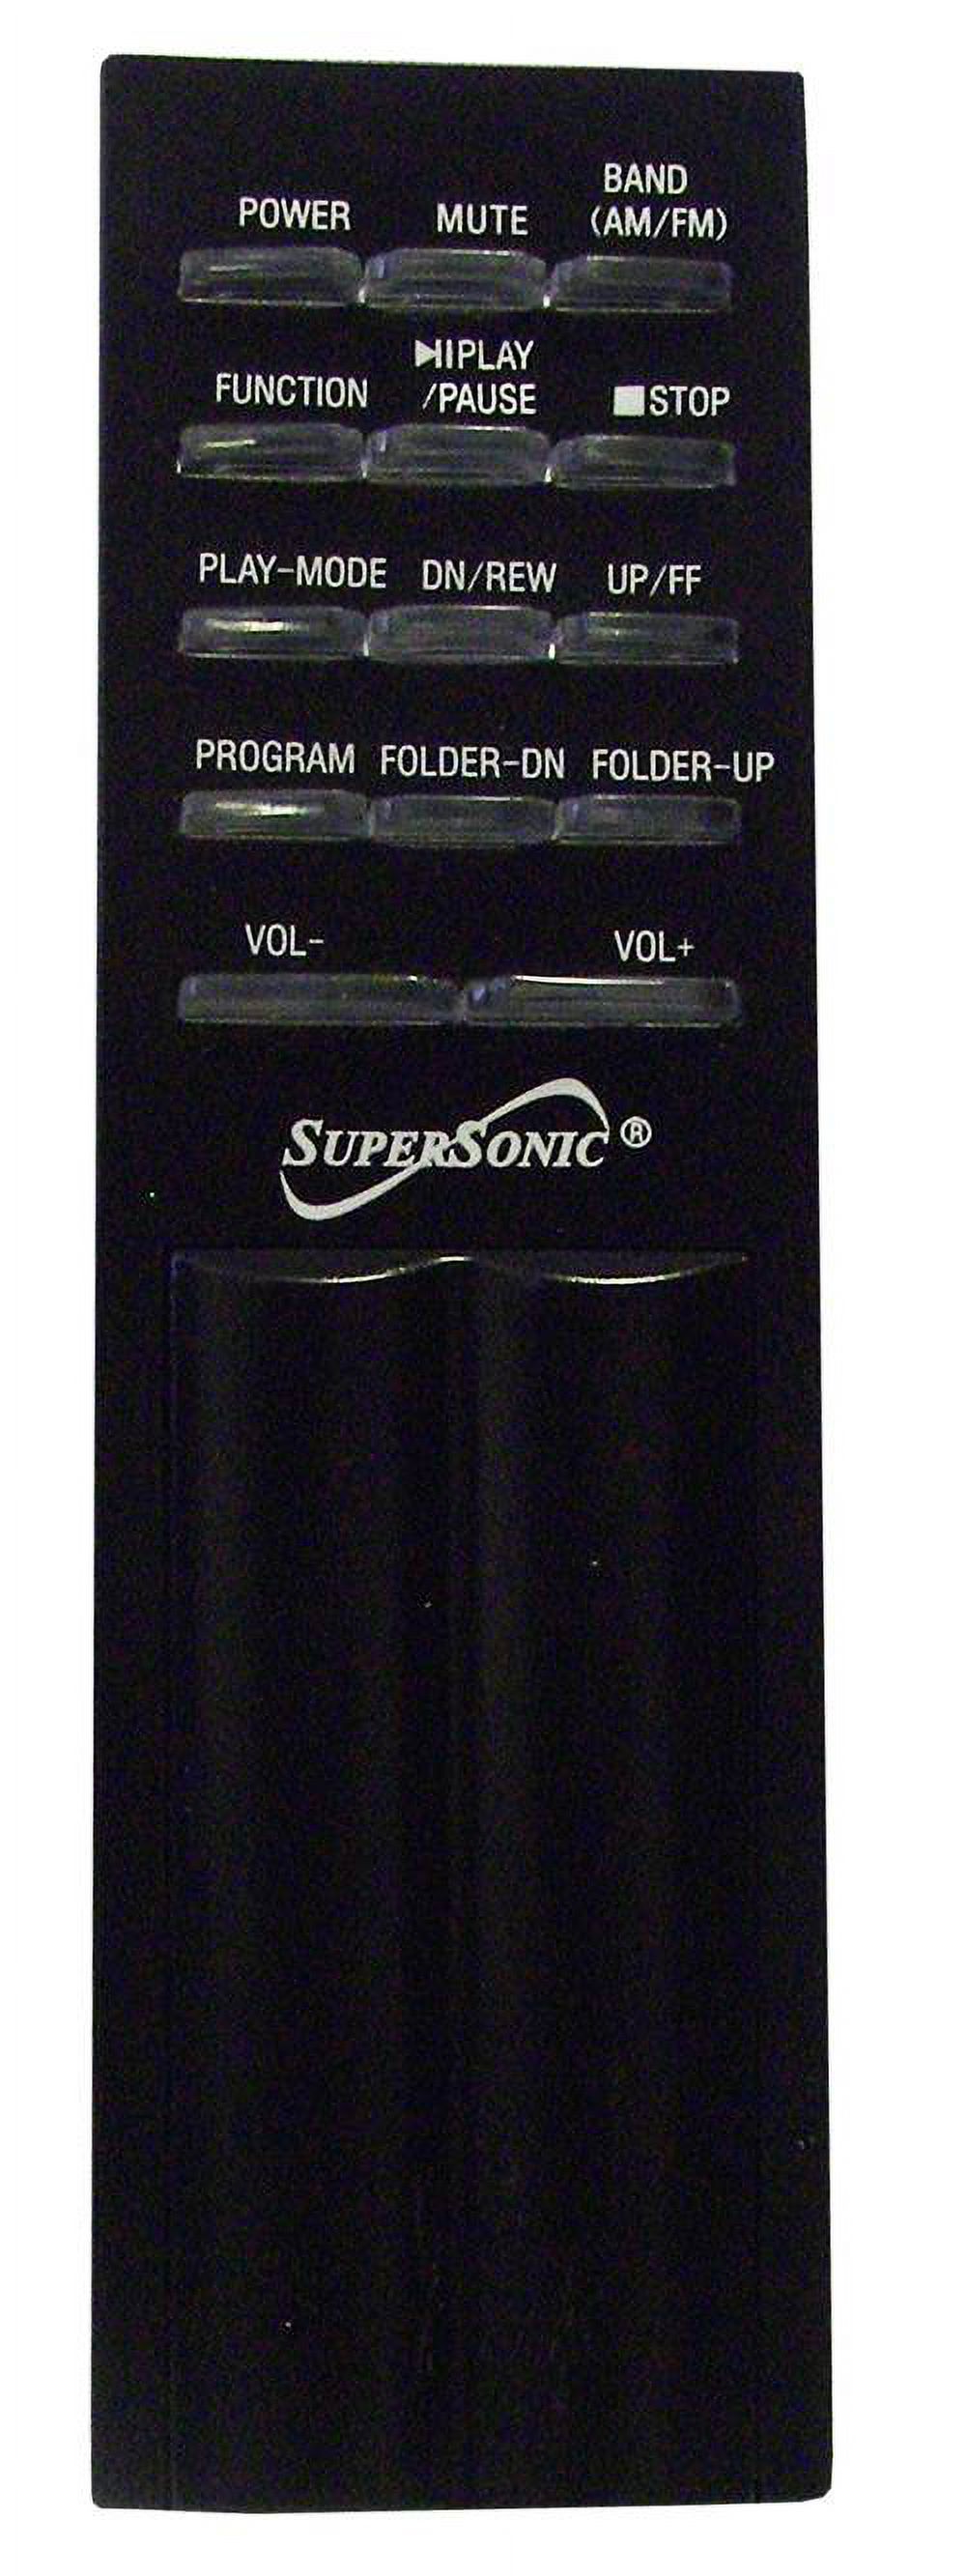 New SUPERSONIC SC-3399M Vertical Loading CD/MP3 Micro System AM/FM Radio SC-3399 - image 3 of 3